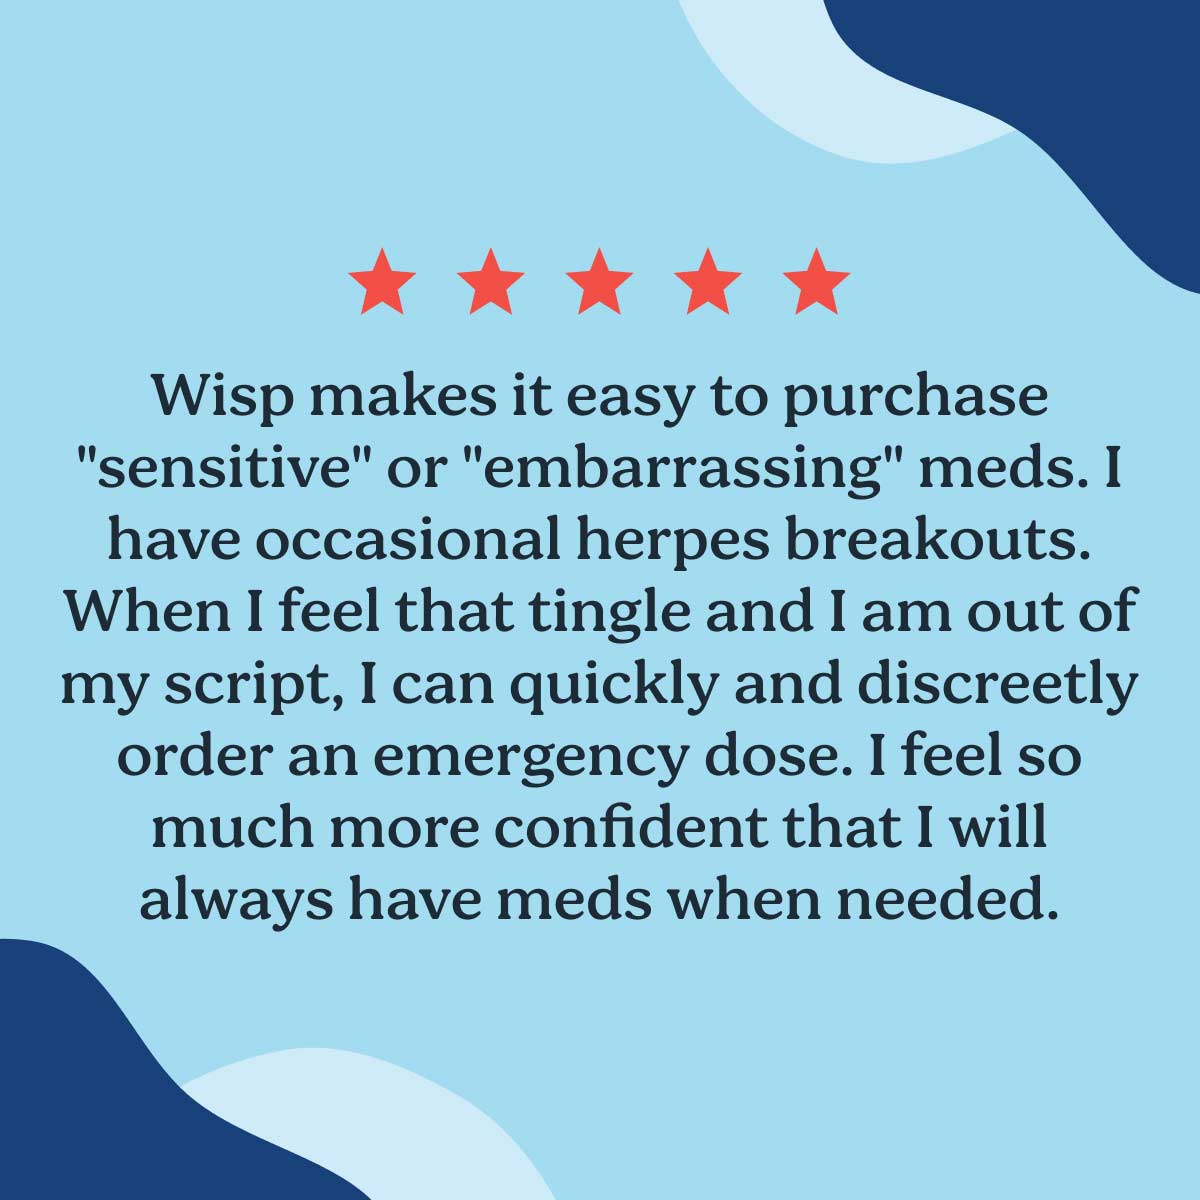 5 star customer review for herpes treatment with colorful abstract shapes on a blue background